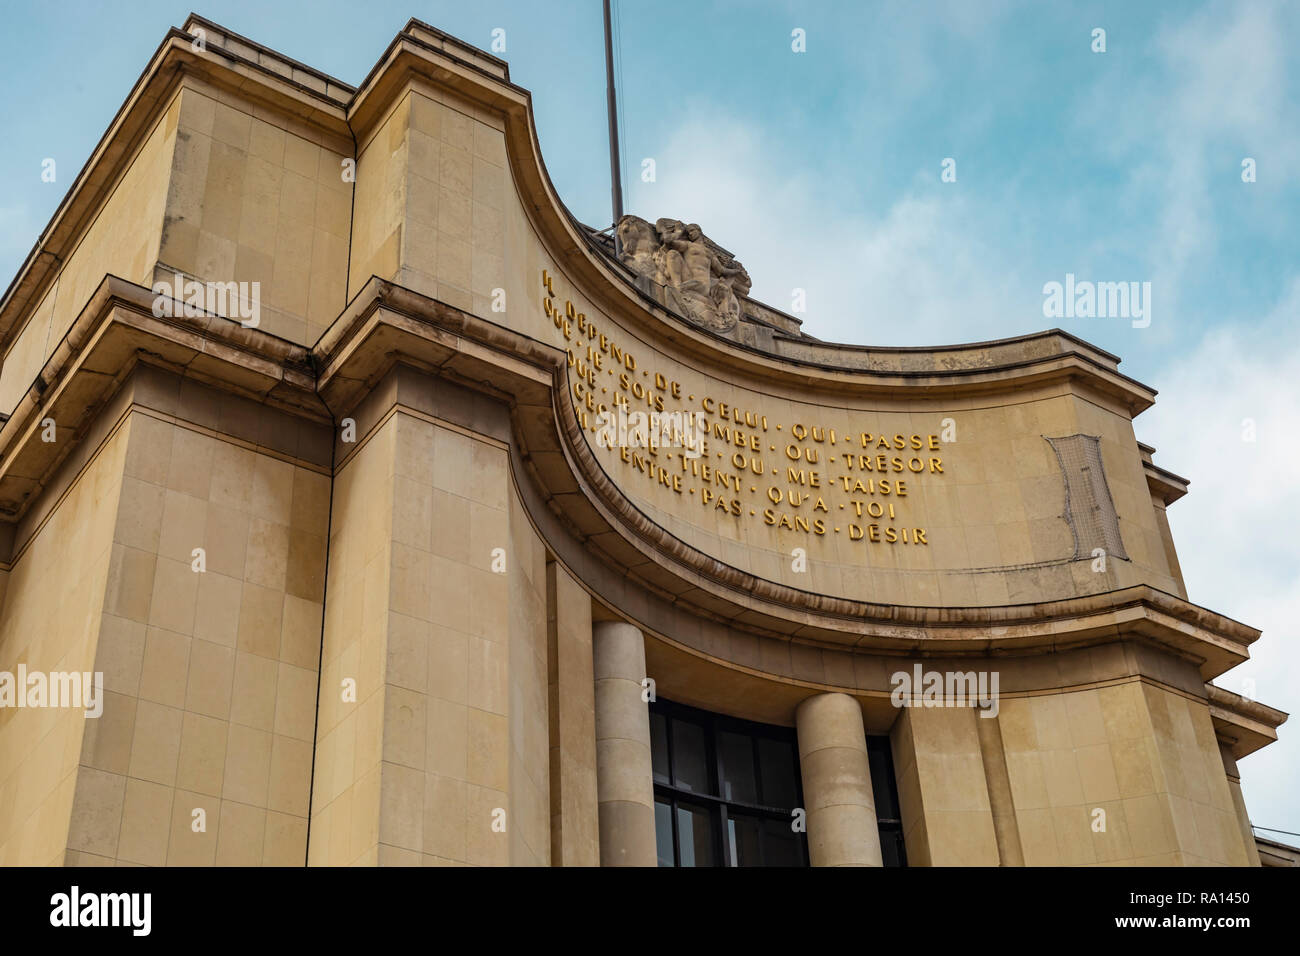 Paris, France - January 27, 2018: Close up view of the building of the Musee de lâ€™Homme on Trocadero Place in Paris, France. Stock Photo